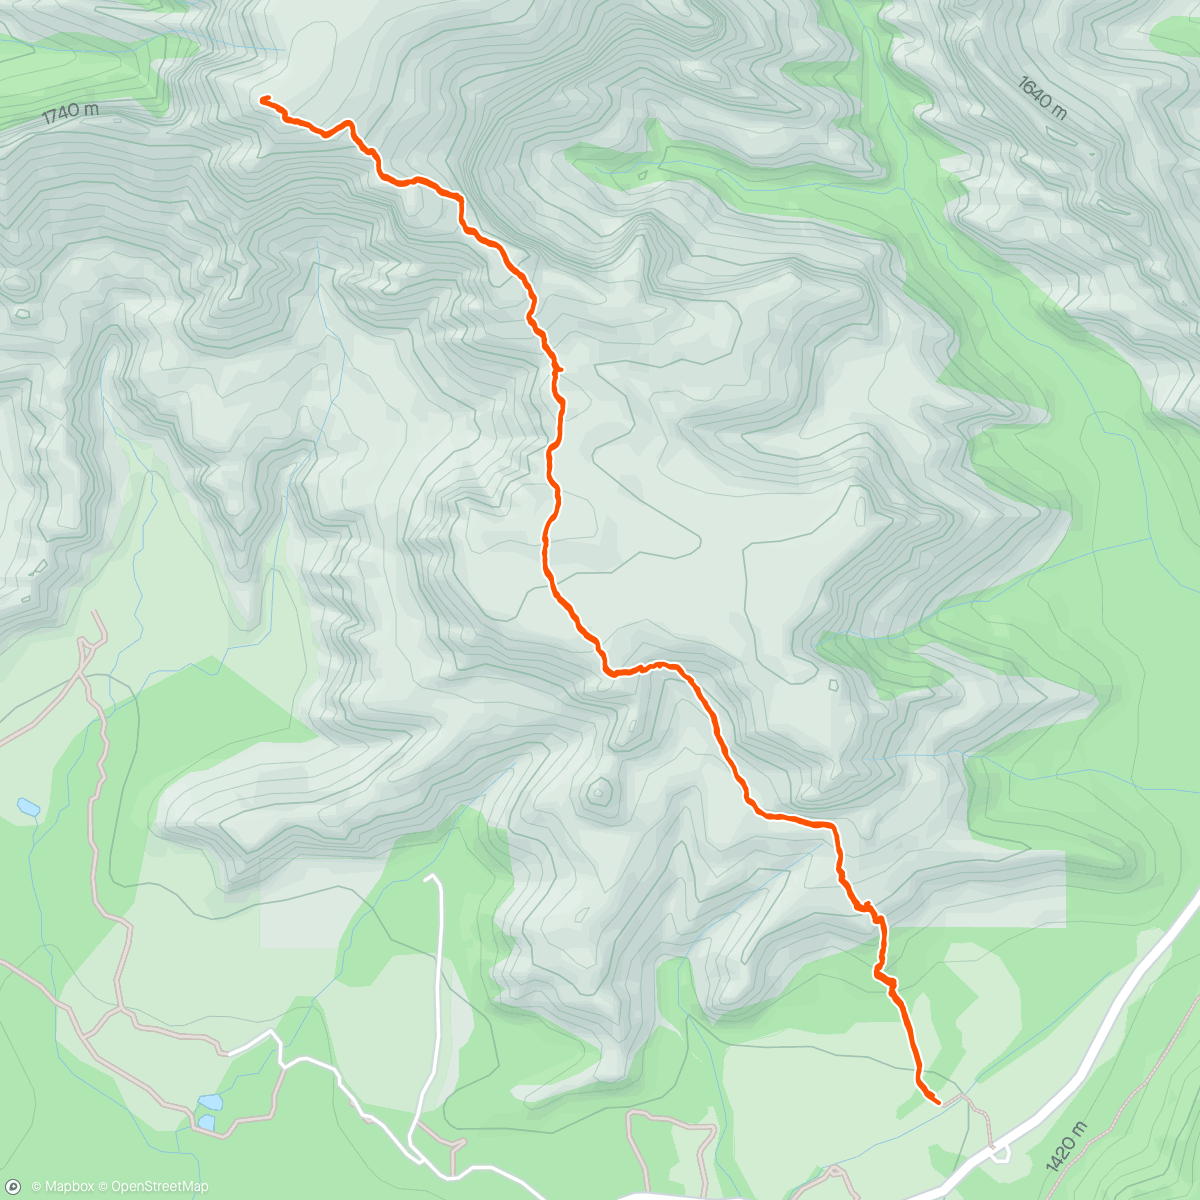 Map of the activity, Sedona - warmup trek for Humphries/Agazzi summit attempt